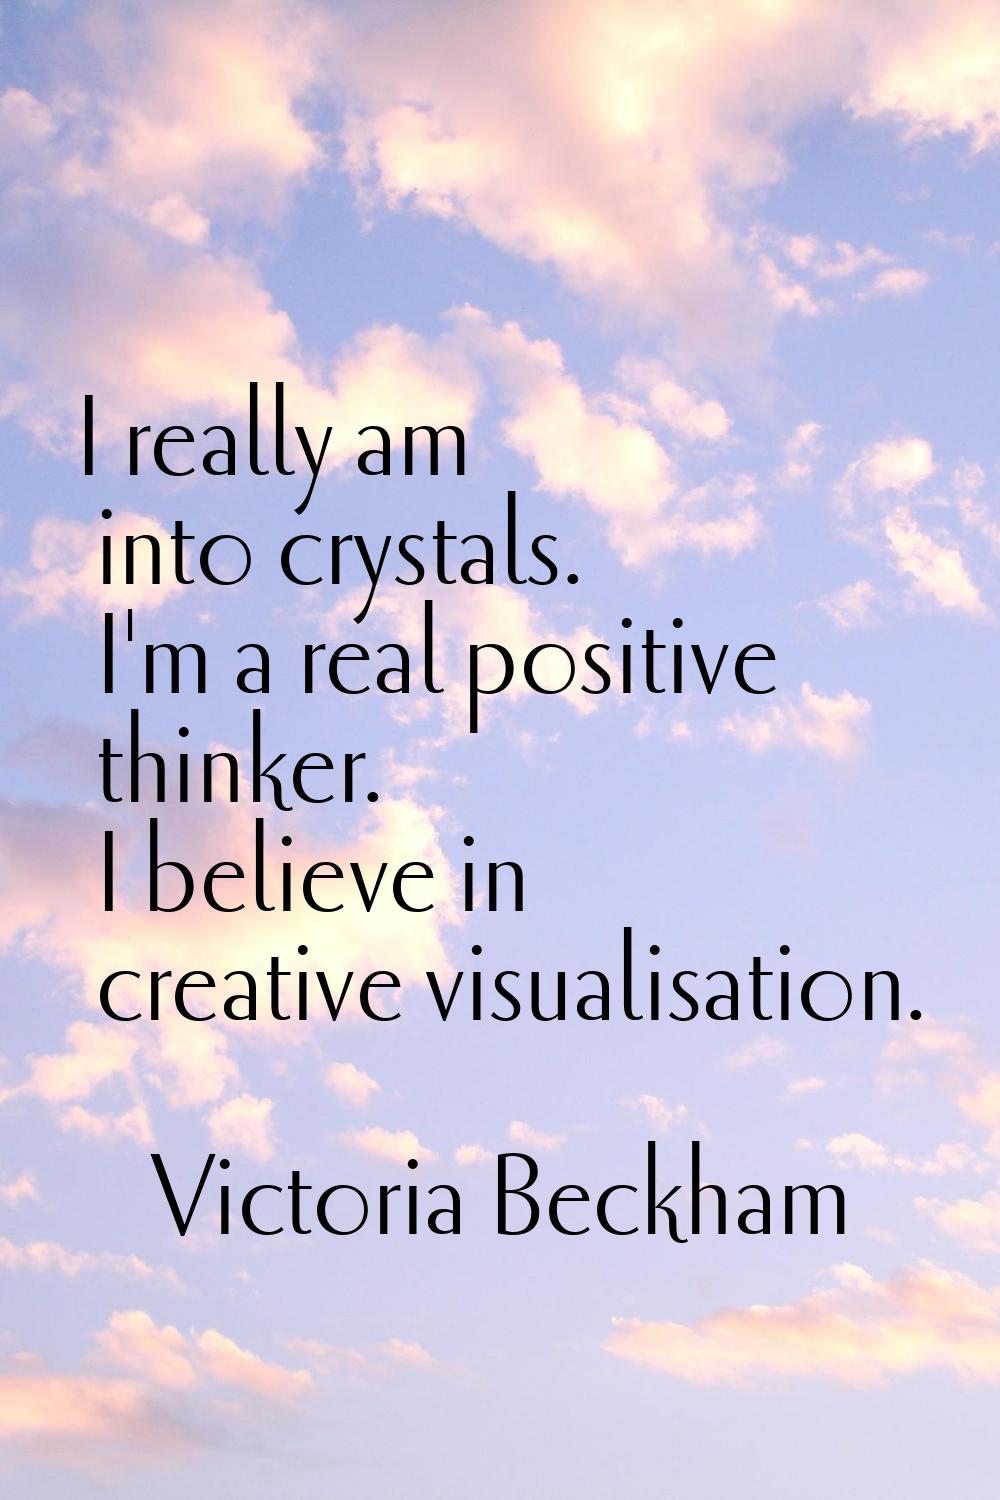 I really am into crystals. I'm a real positive thinker. I believe in creative visualisation.